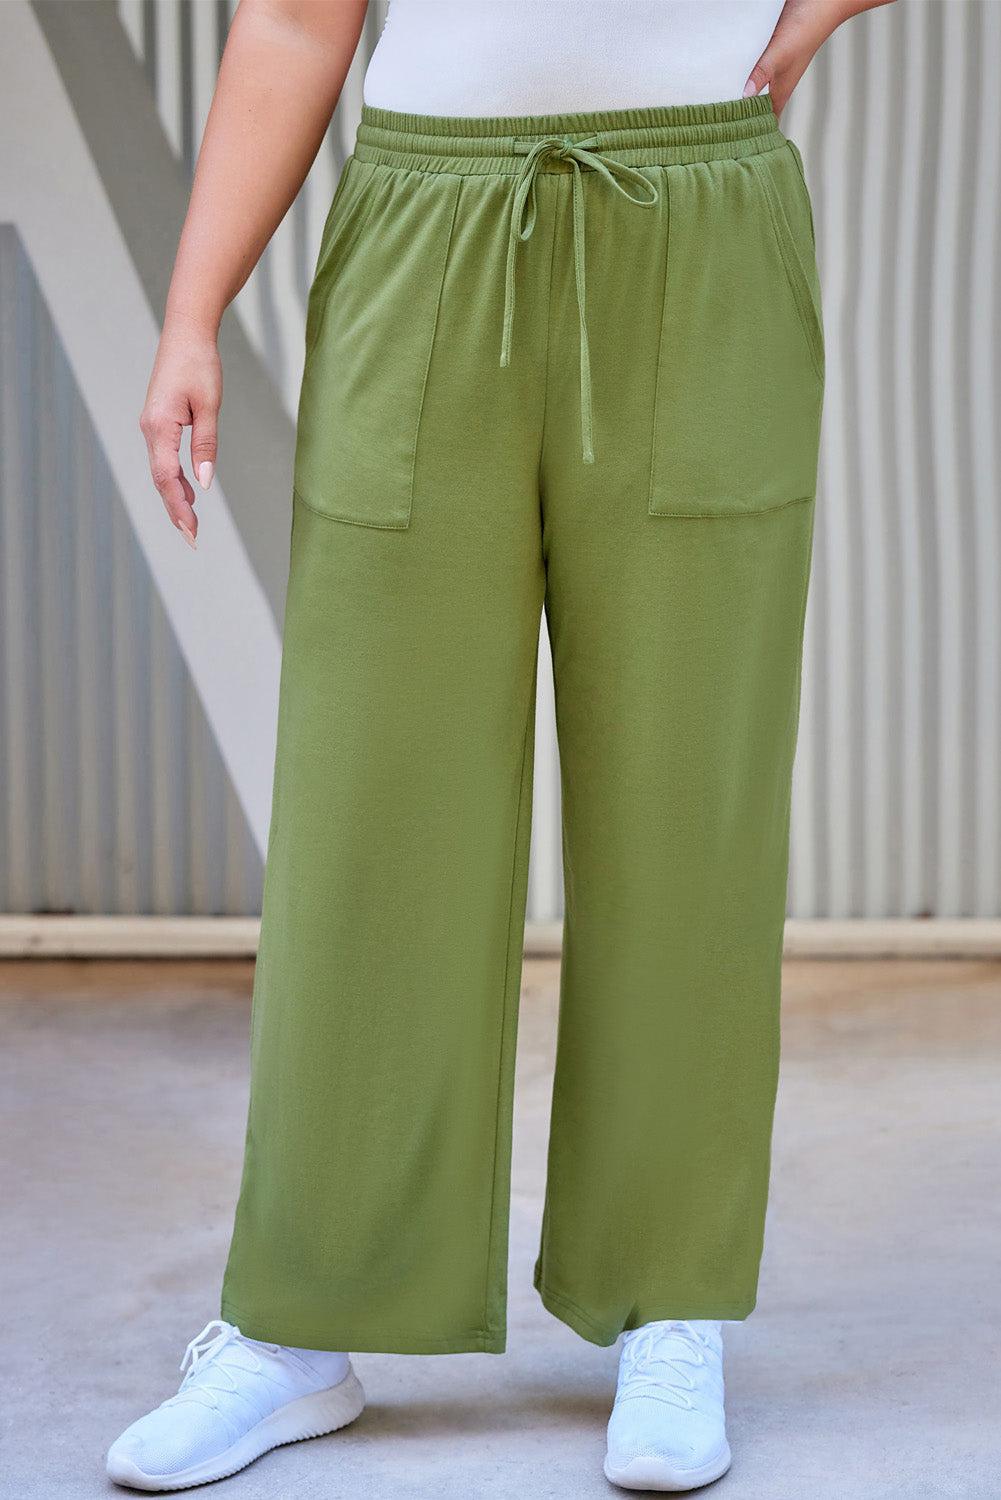 a woman in a white shirt and green pants